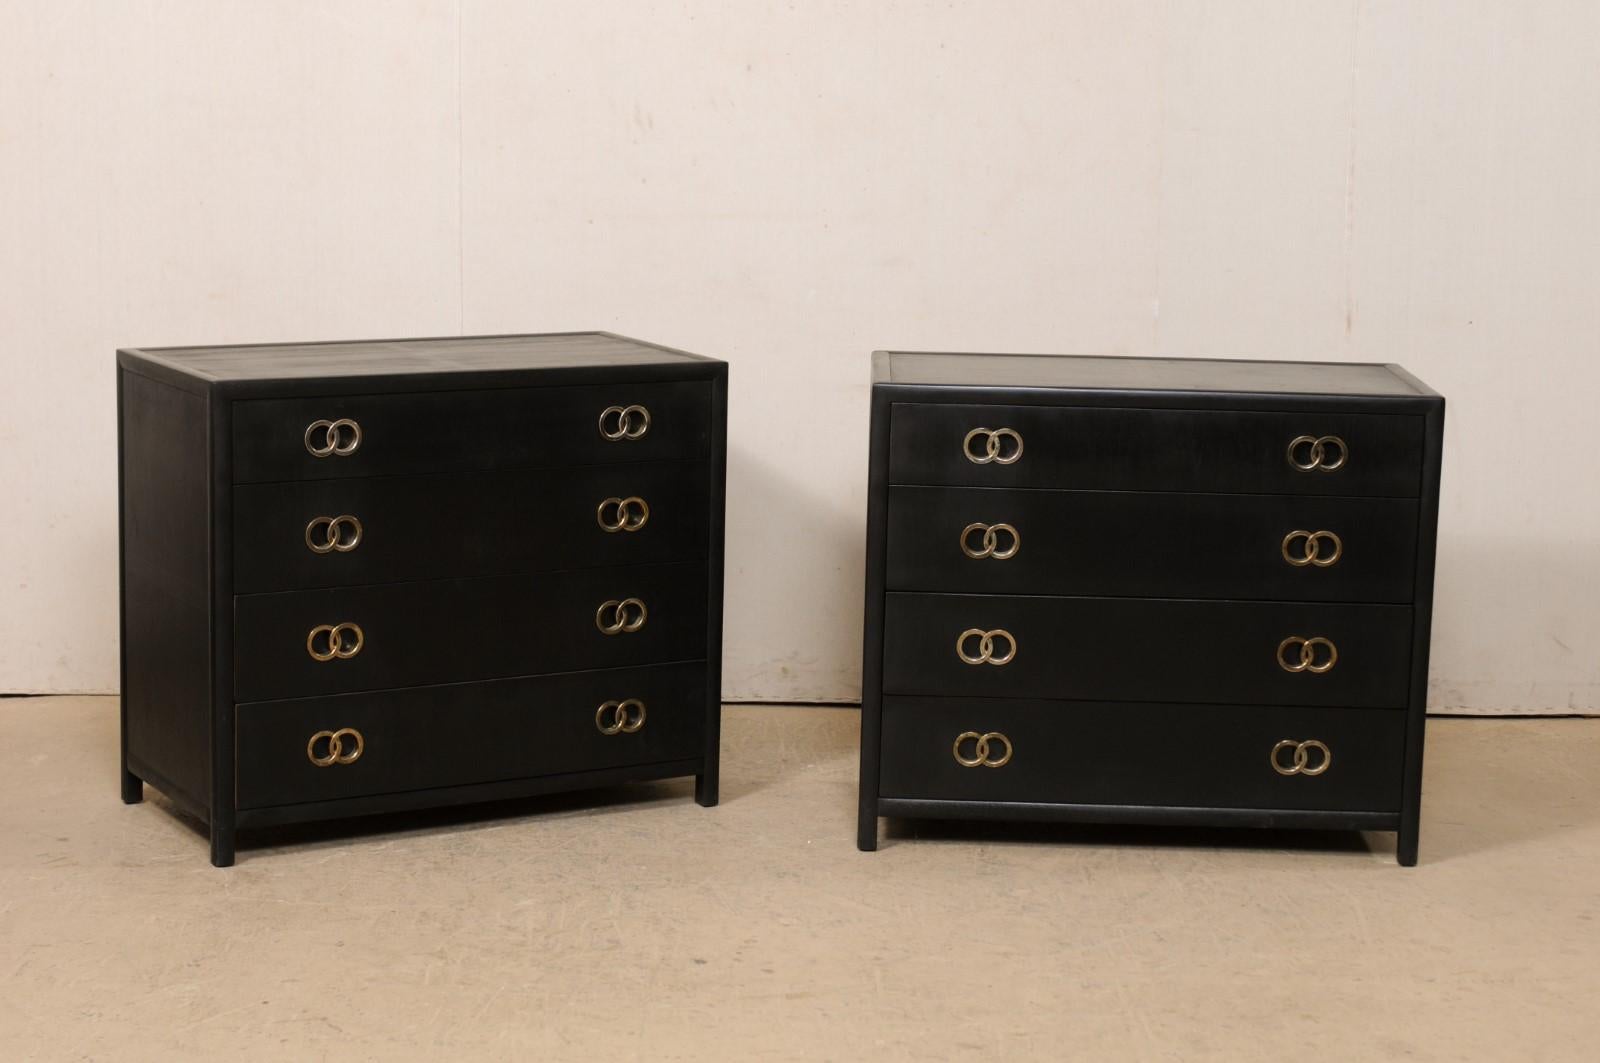 A pair of modern designed American painted wood four-drawer chests. These vintage chests from American furniture makers, 